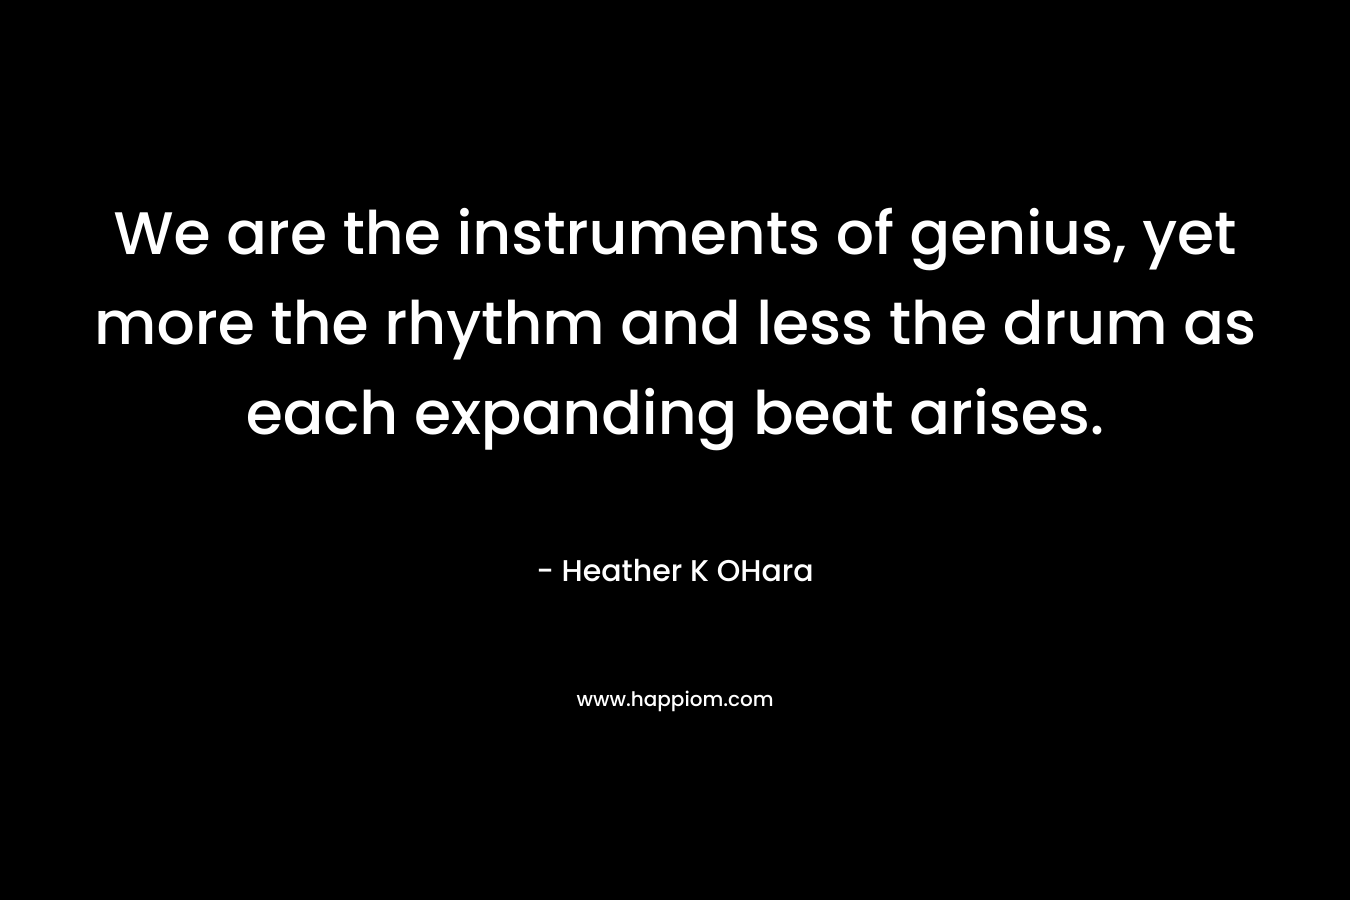 We are the instruments of genius, yet more the rhythm and less the drum as each expanding beat arises. – Heather K OHara